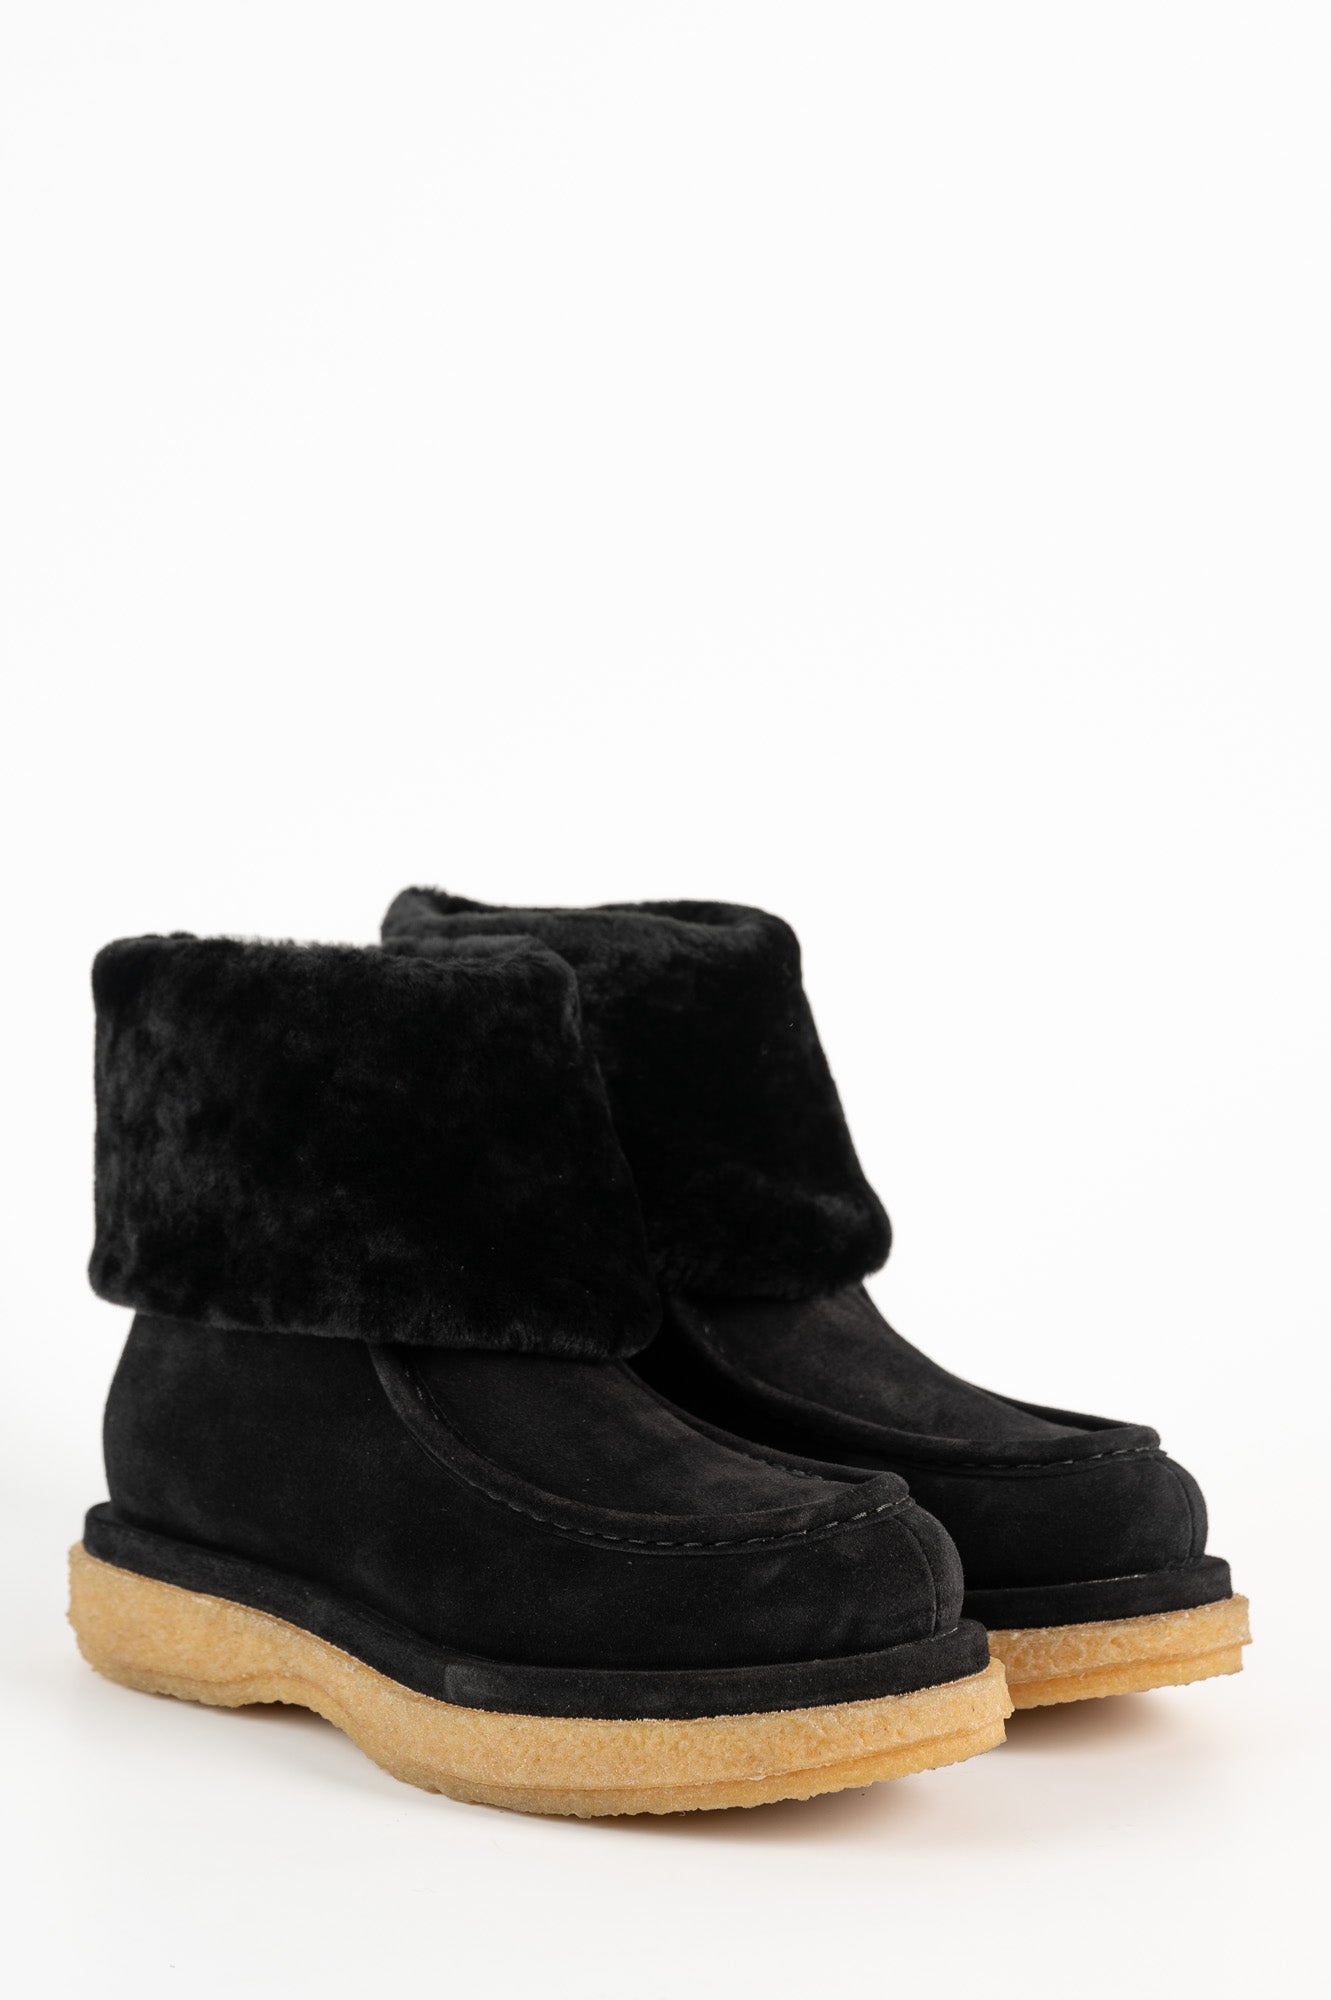 Warm Lined Boot Holyfur 214 | Black Suede